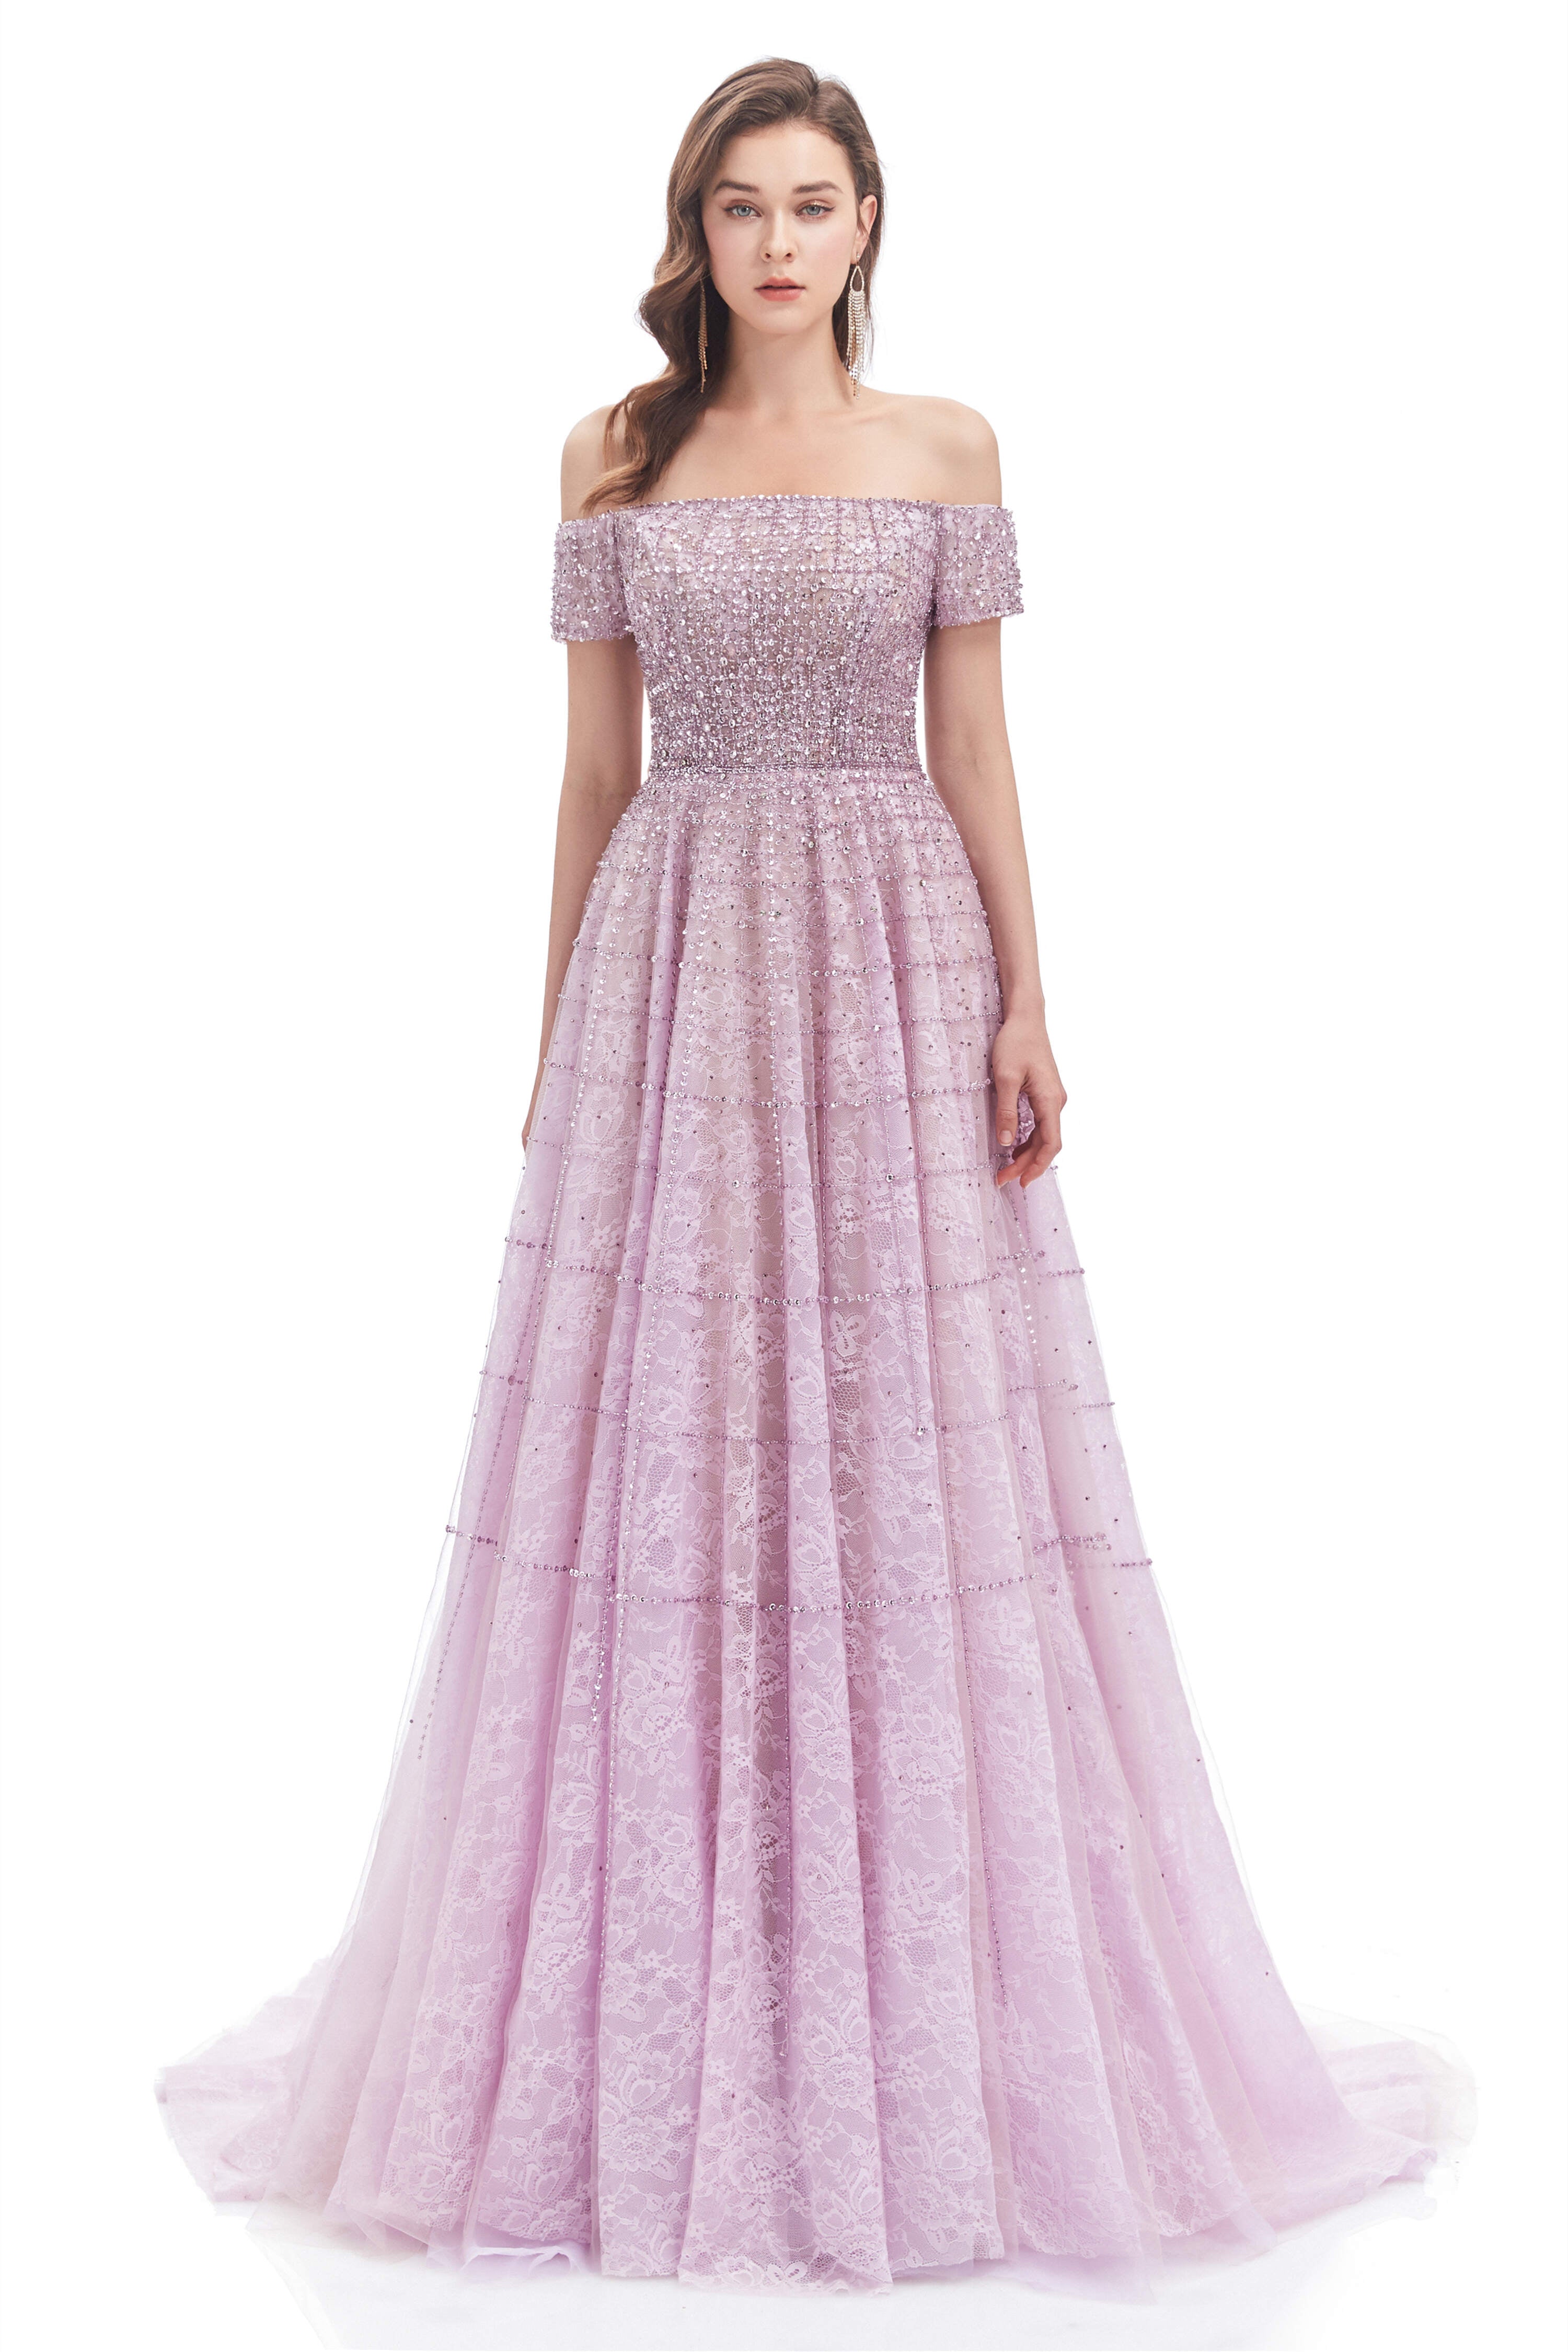 Lavender Lace Off the Shoulder Beaded Sequins Sweep-Train A-Line Corset Prom Dresses outfit, Formal Dress Lace